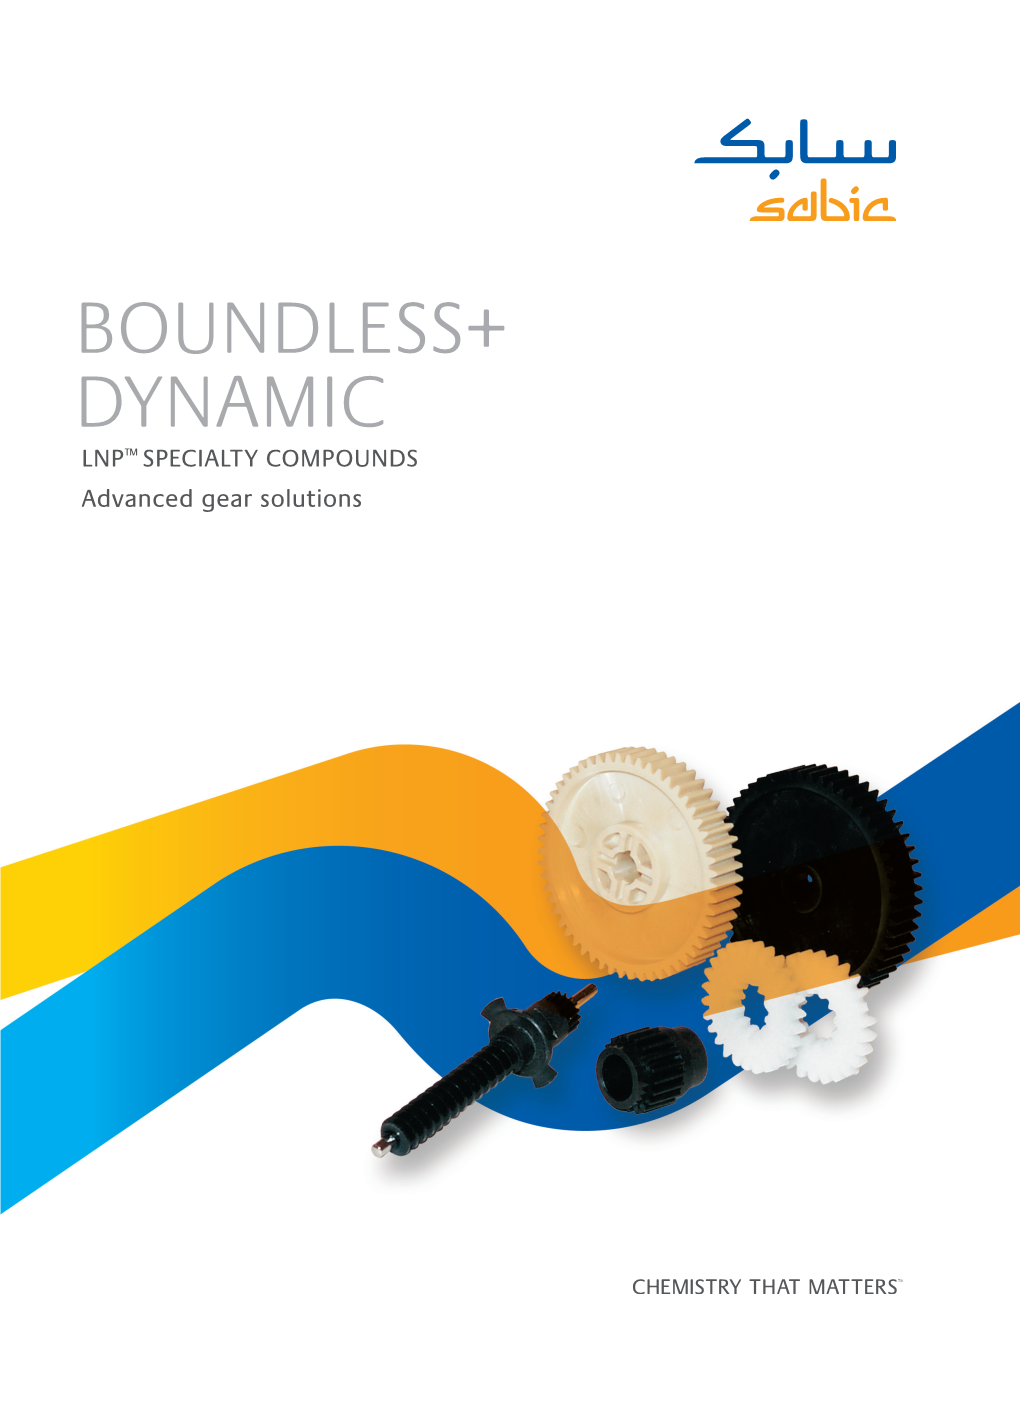 Boundless+ Dynamic LNP™ Specialty Compounds Advanced Gear Solutions SABIC